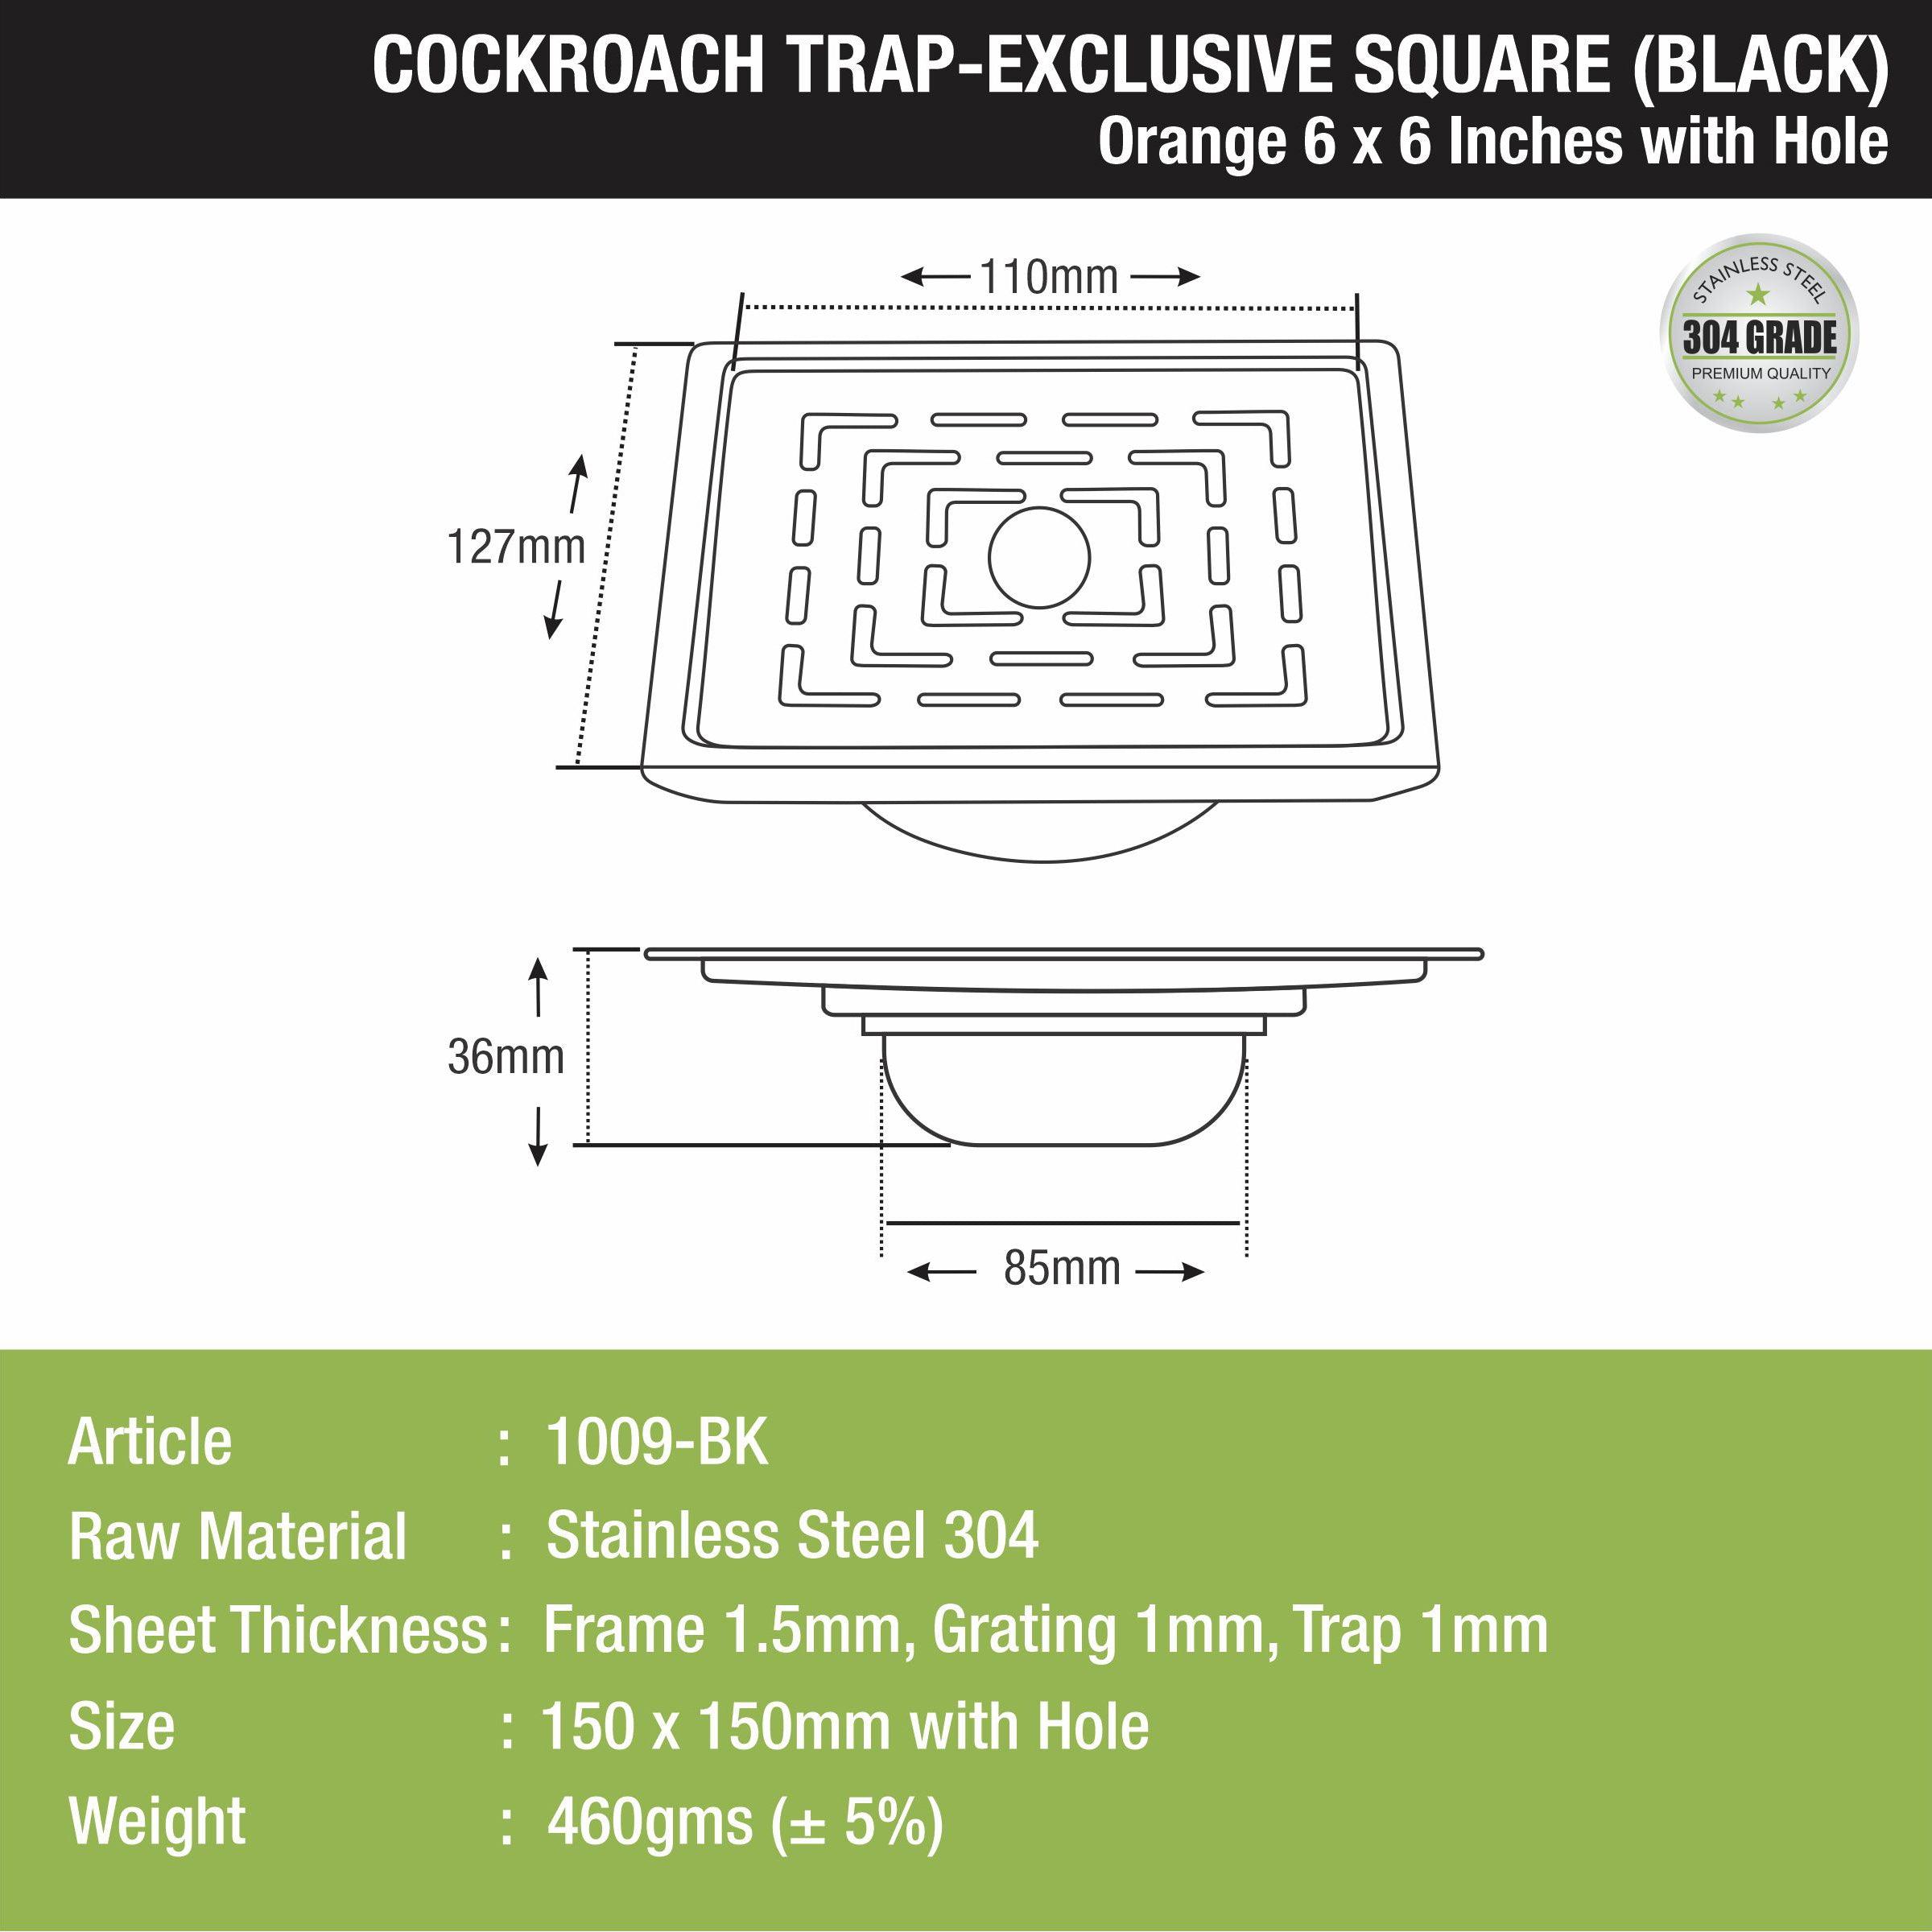 Orange Exclusive Square Floor Drain in Black PVD Coating (6 x 6 Inches) with Hole & Cockroach Trap size and measurement